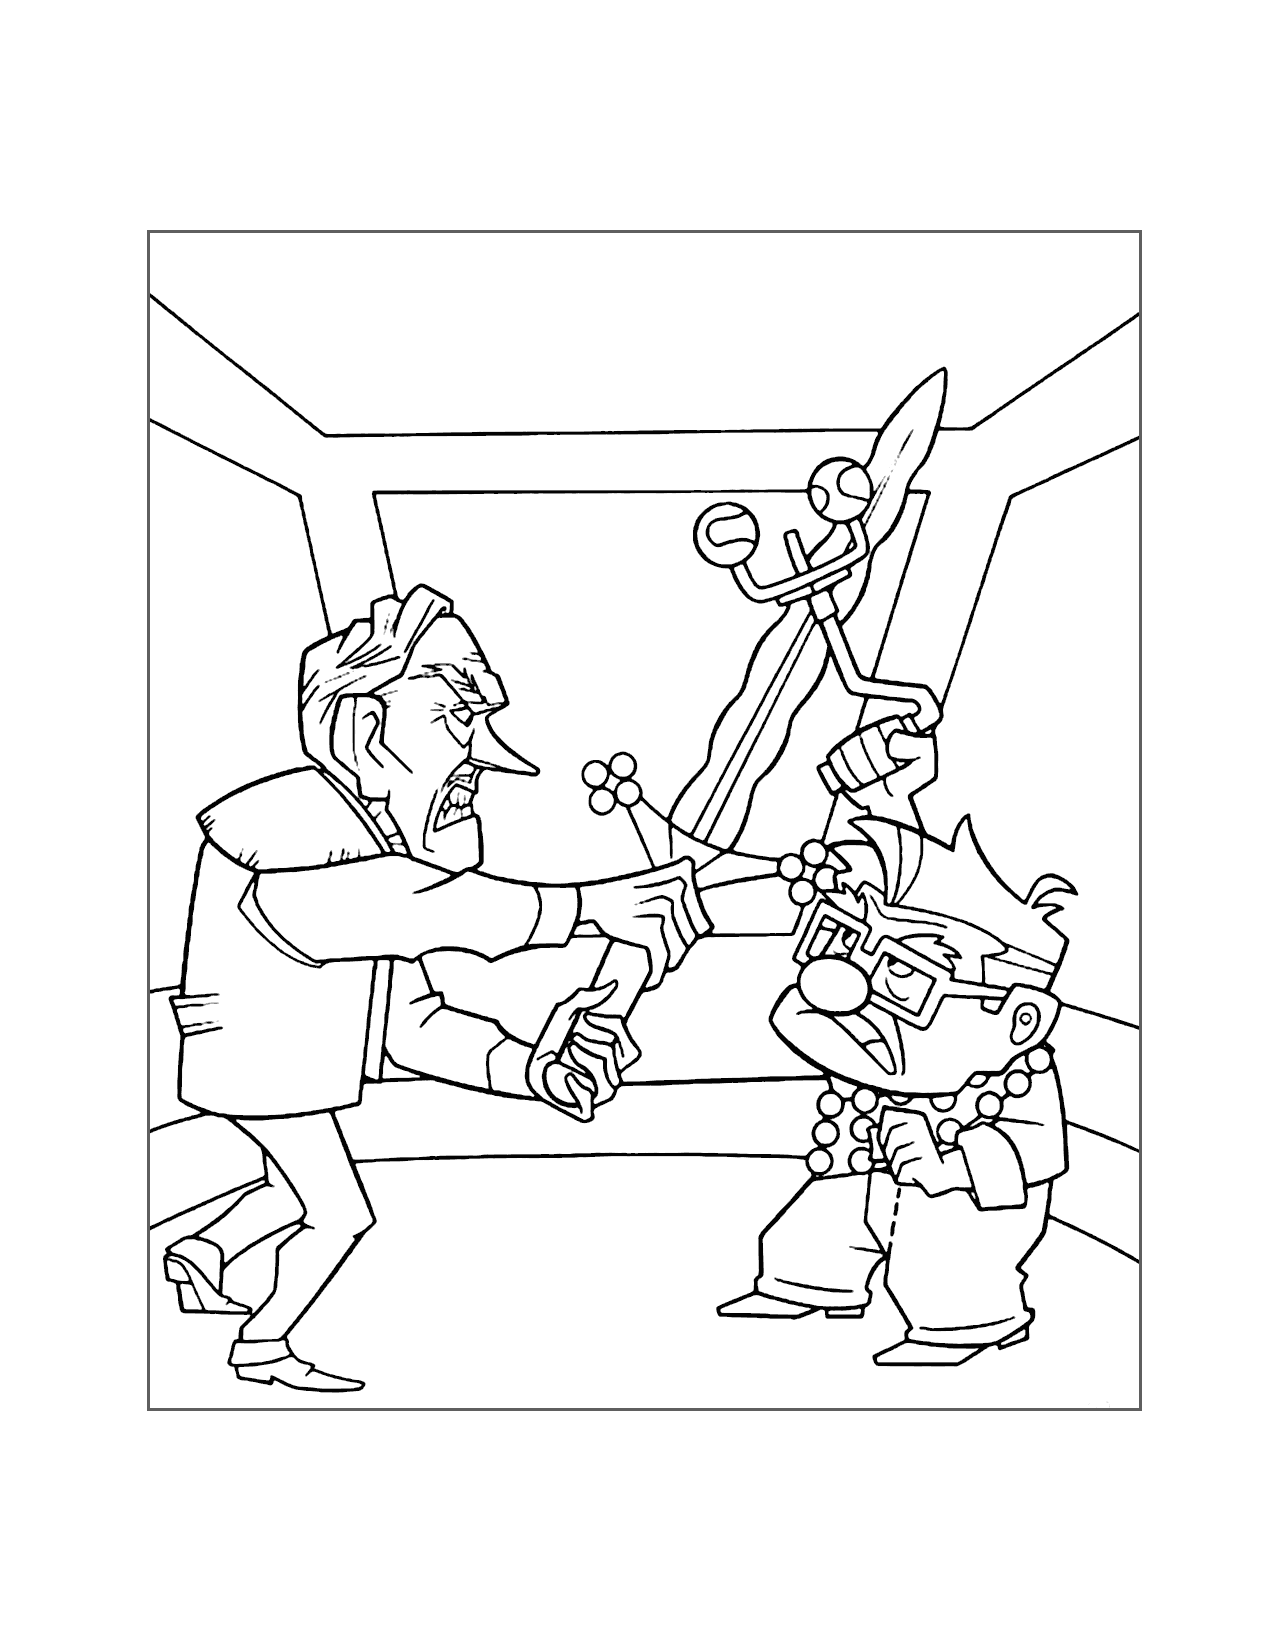 Carl And Charles Muntz Fight Up Coloring Page